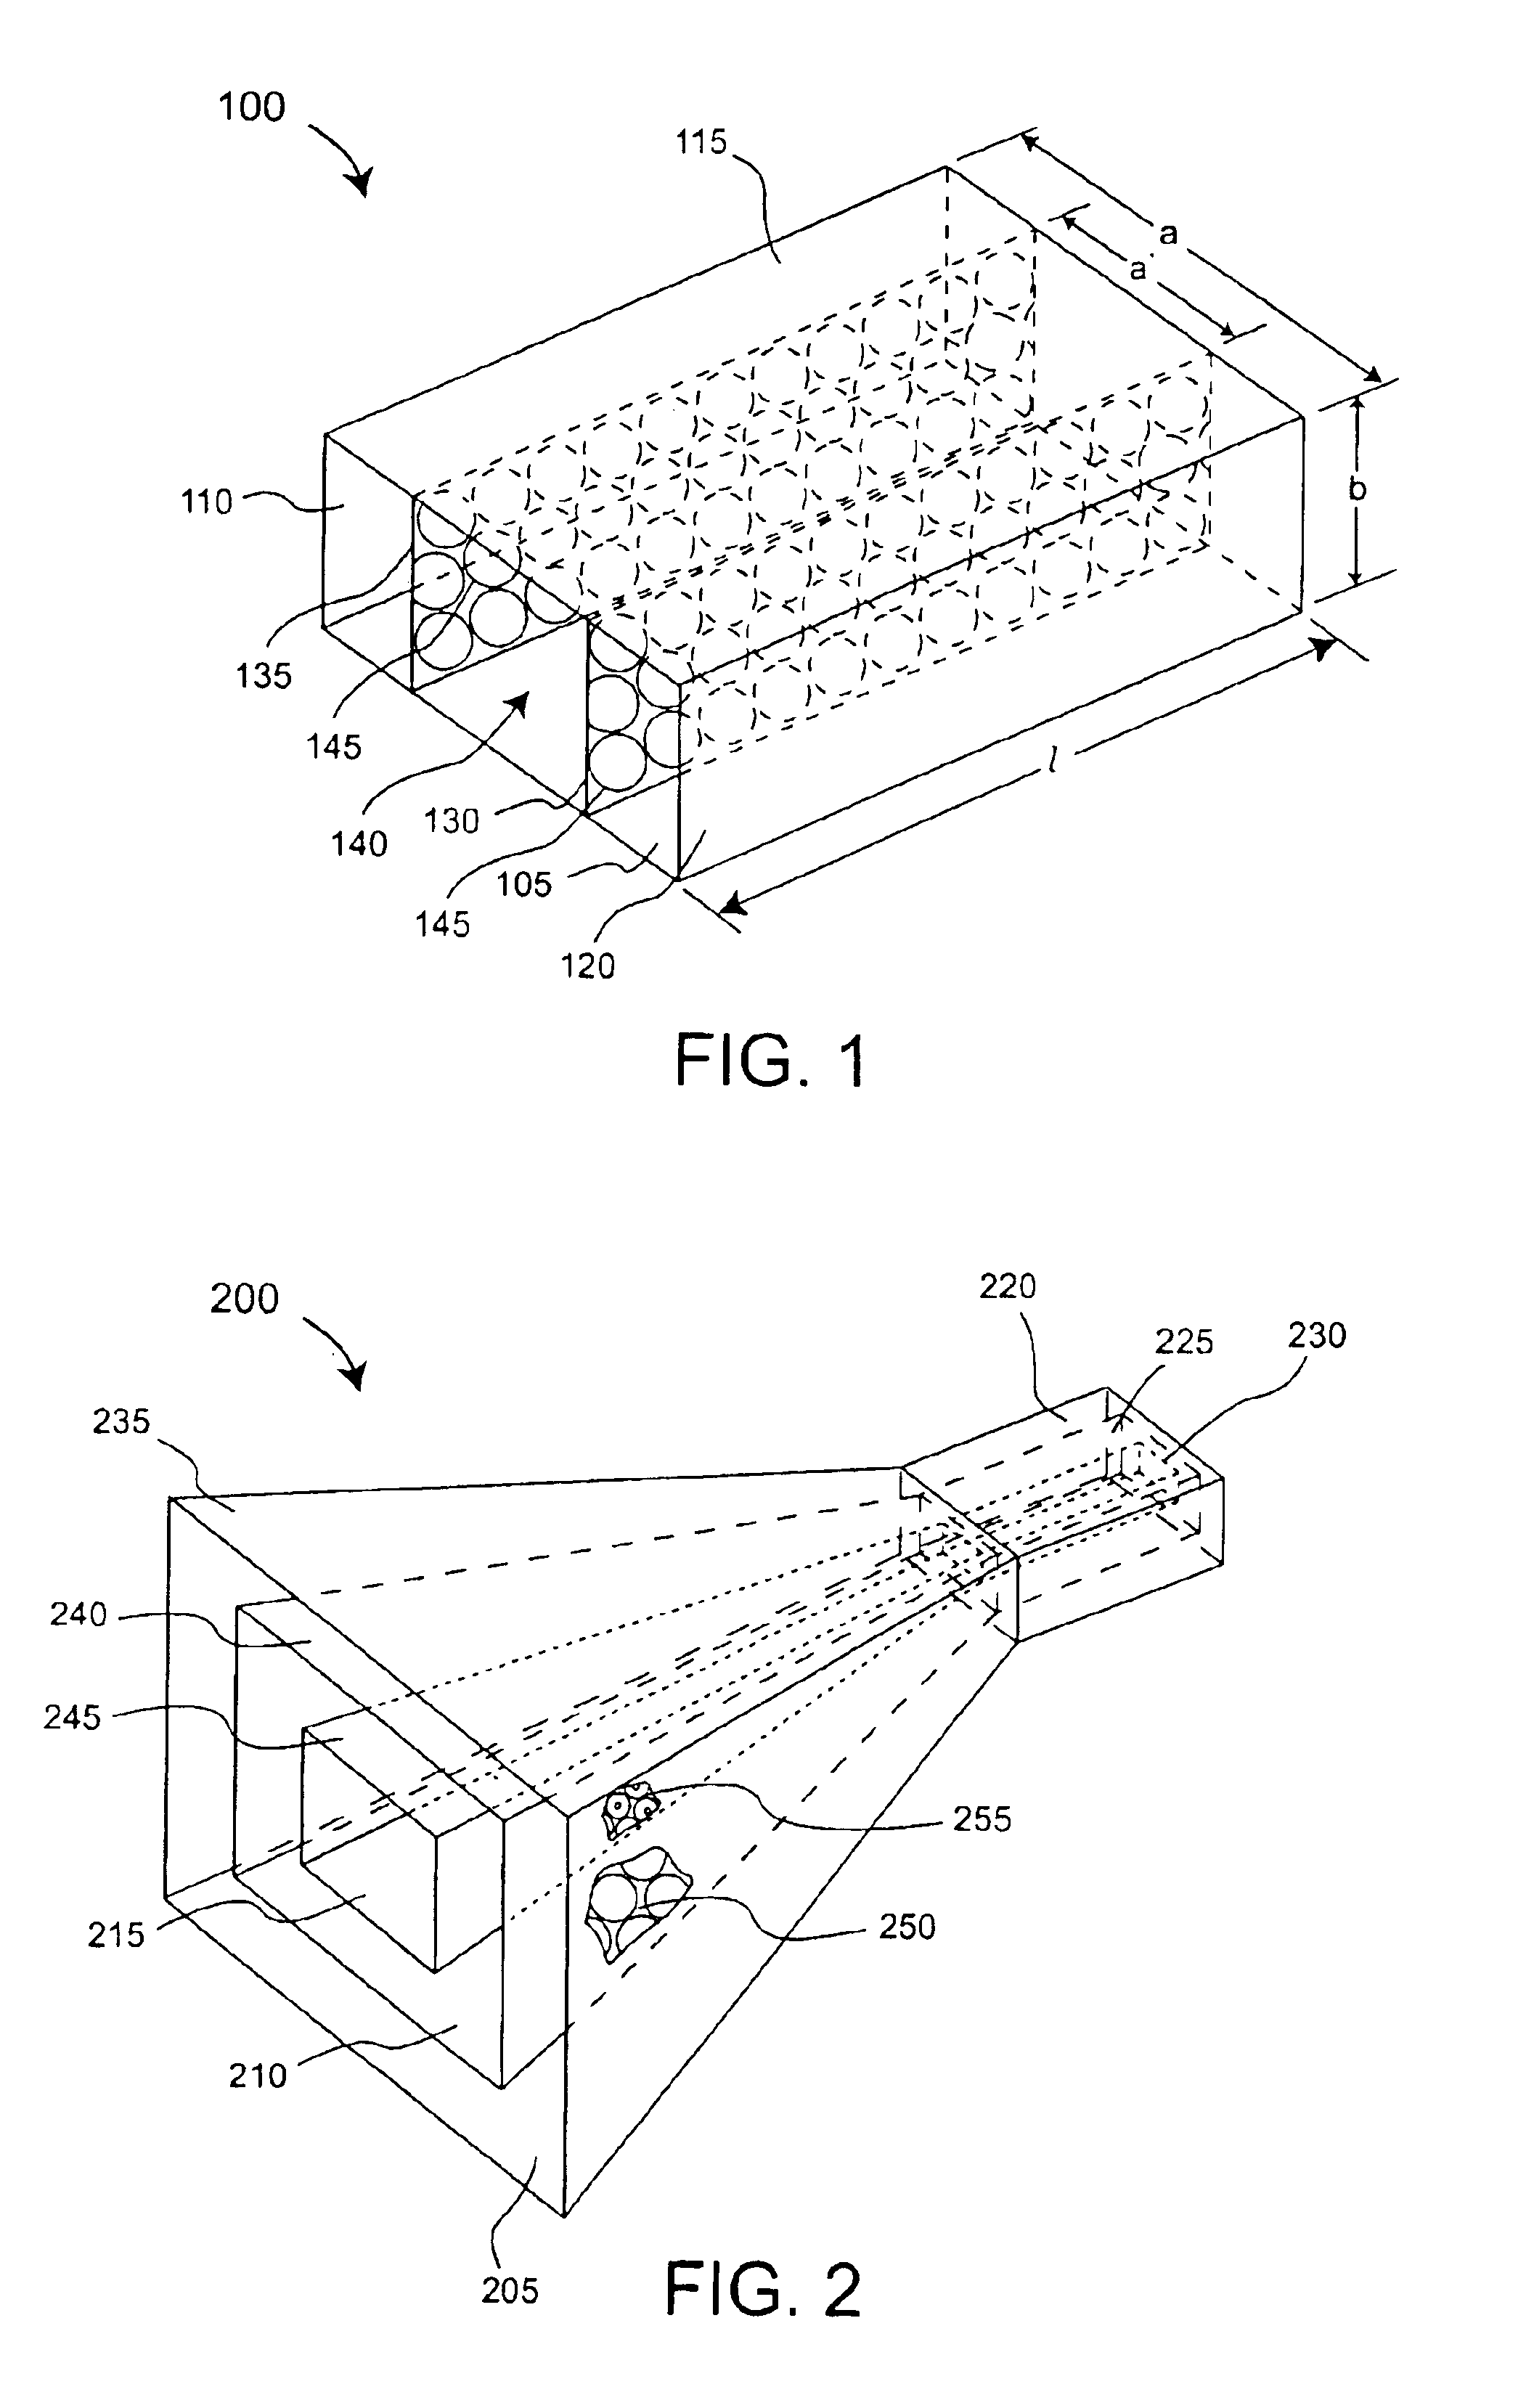 Multi-band horn antenna using frequency selective surfaces